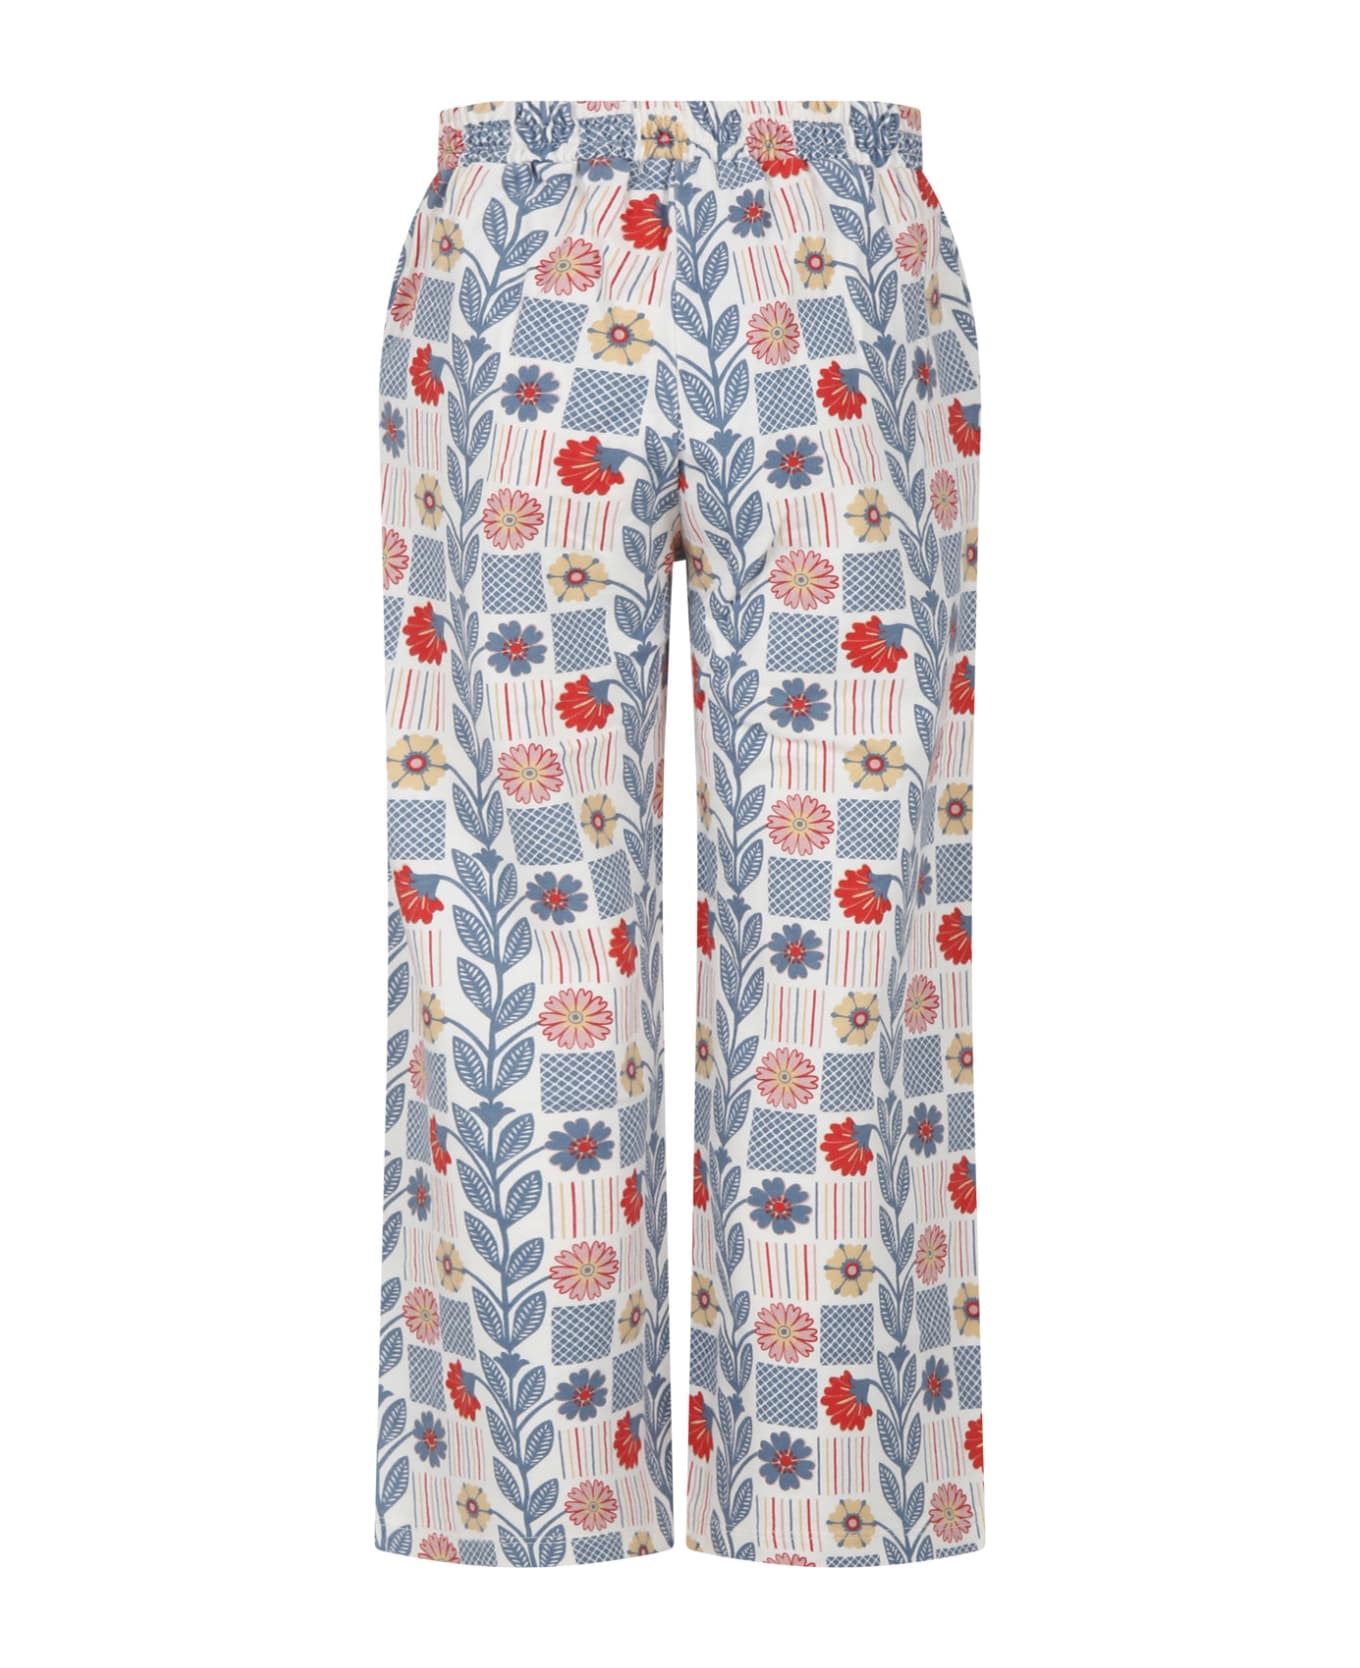 Coco Au Lait White Trousers For Girl With Flowers Print - Multicolor ボトムス